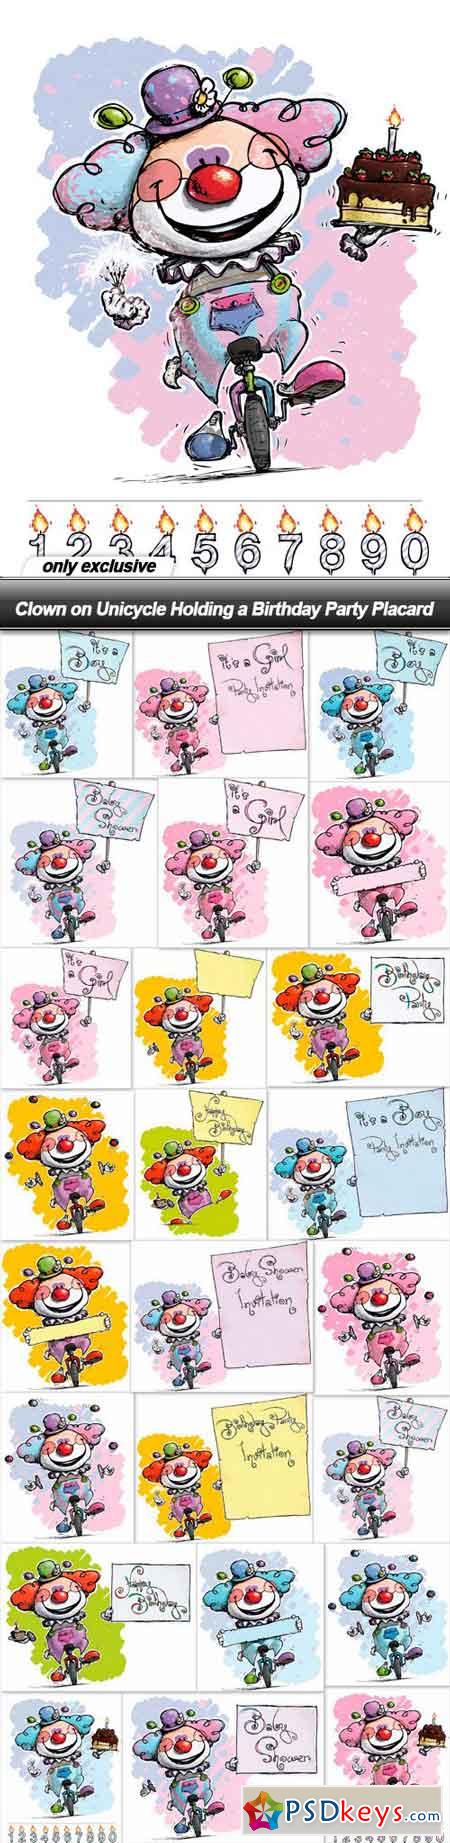 Clown on Unicycle Holding a Birthday Party Placard - 25 EPS